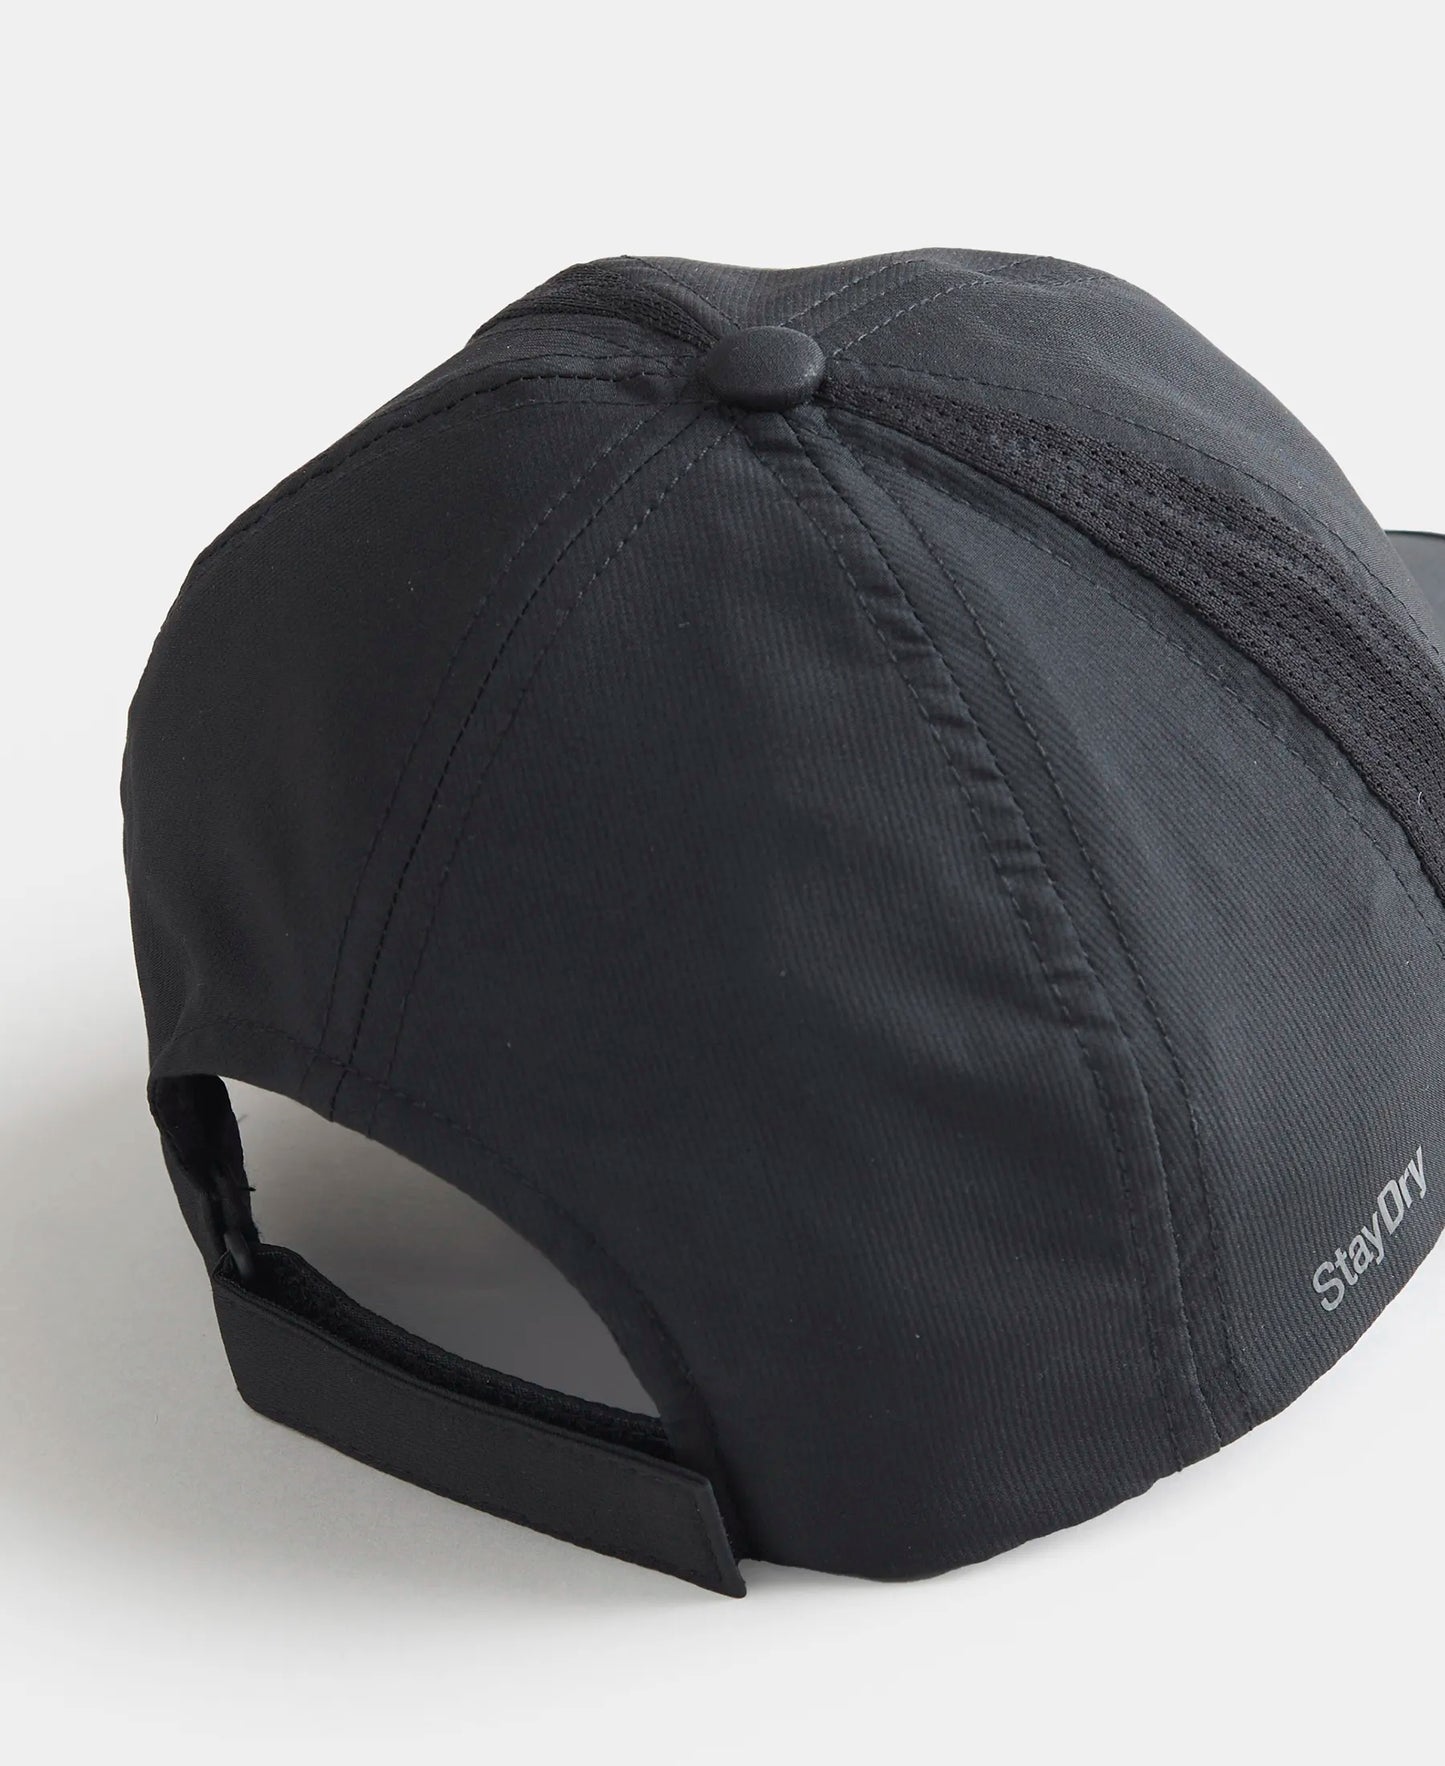 Polyester Solid Cap with Adjustable Back Closure and StayDry Technology - Black-3